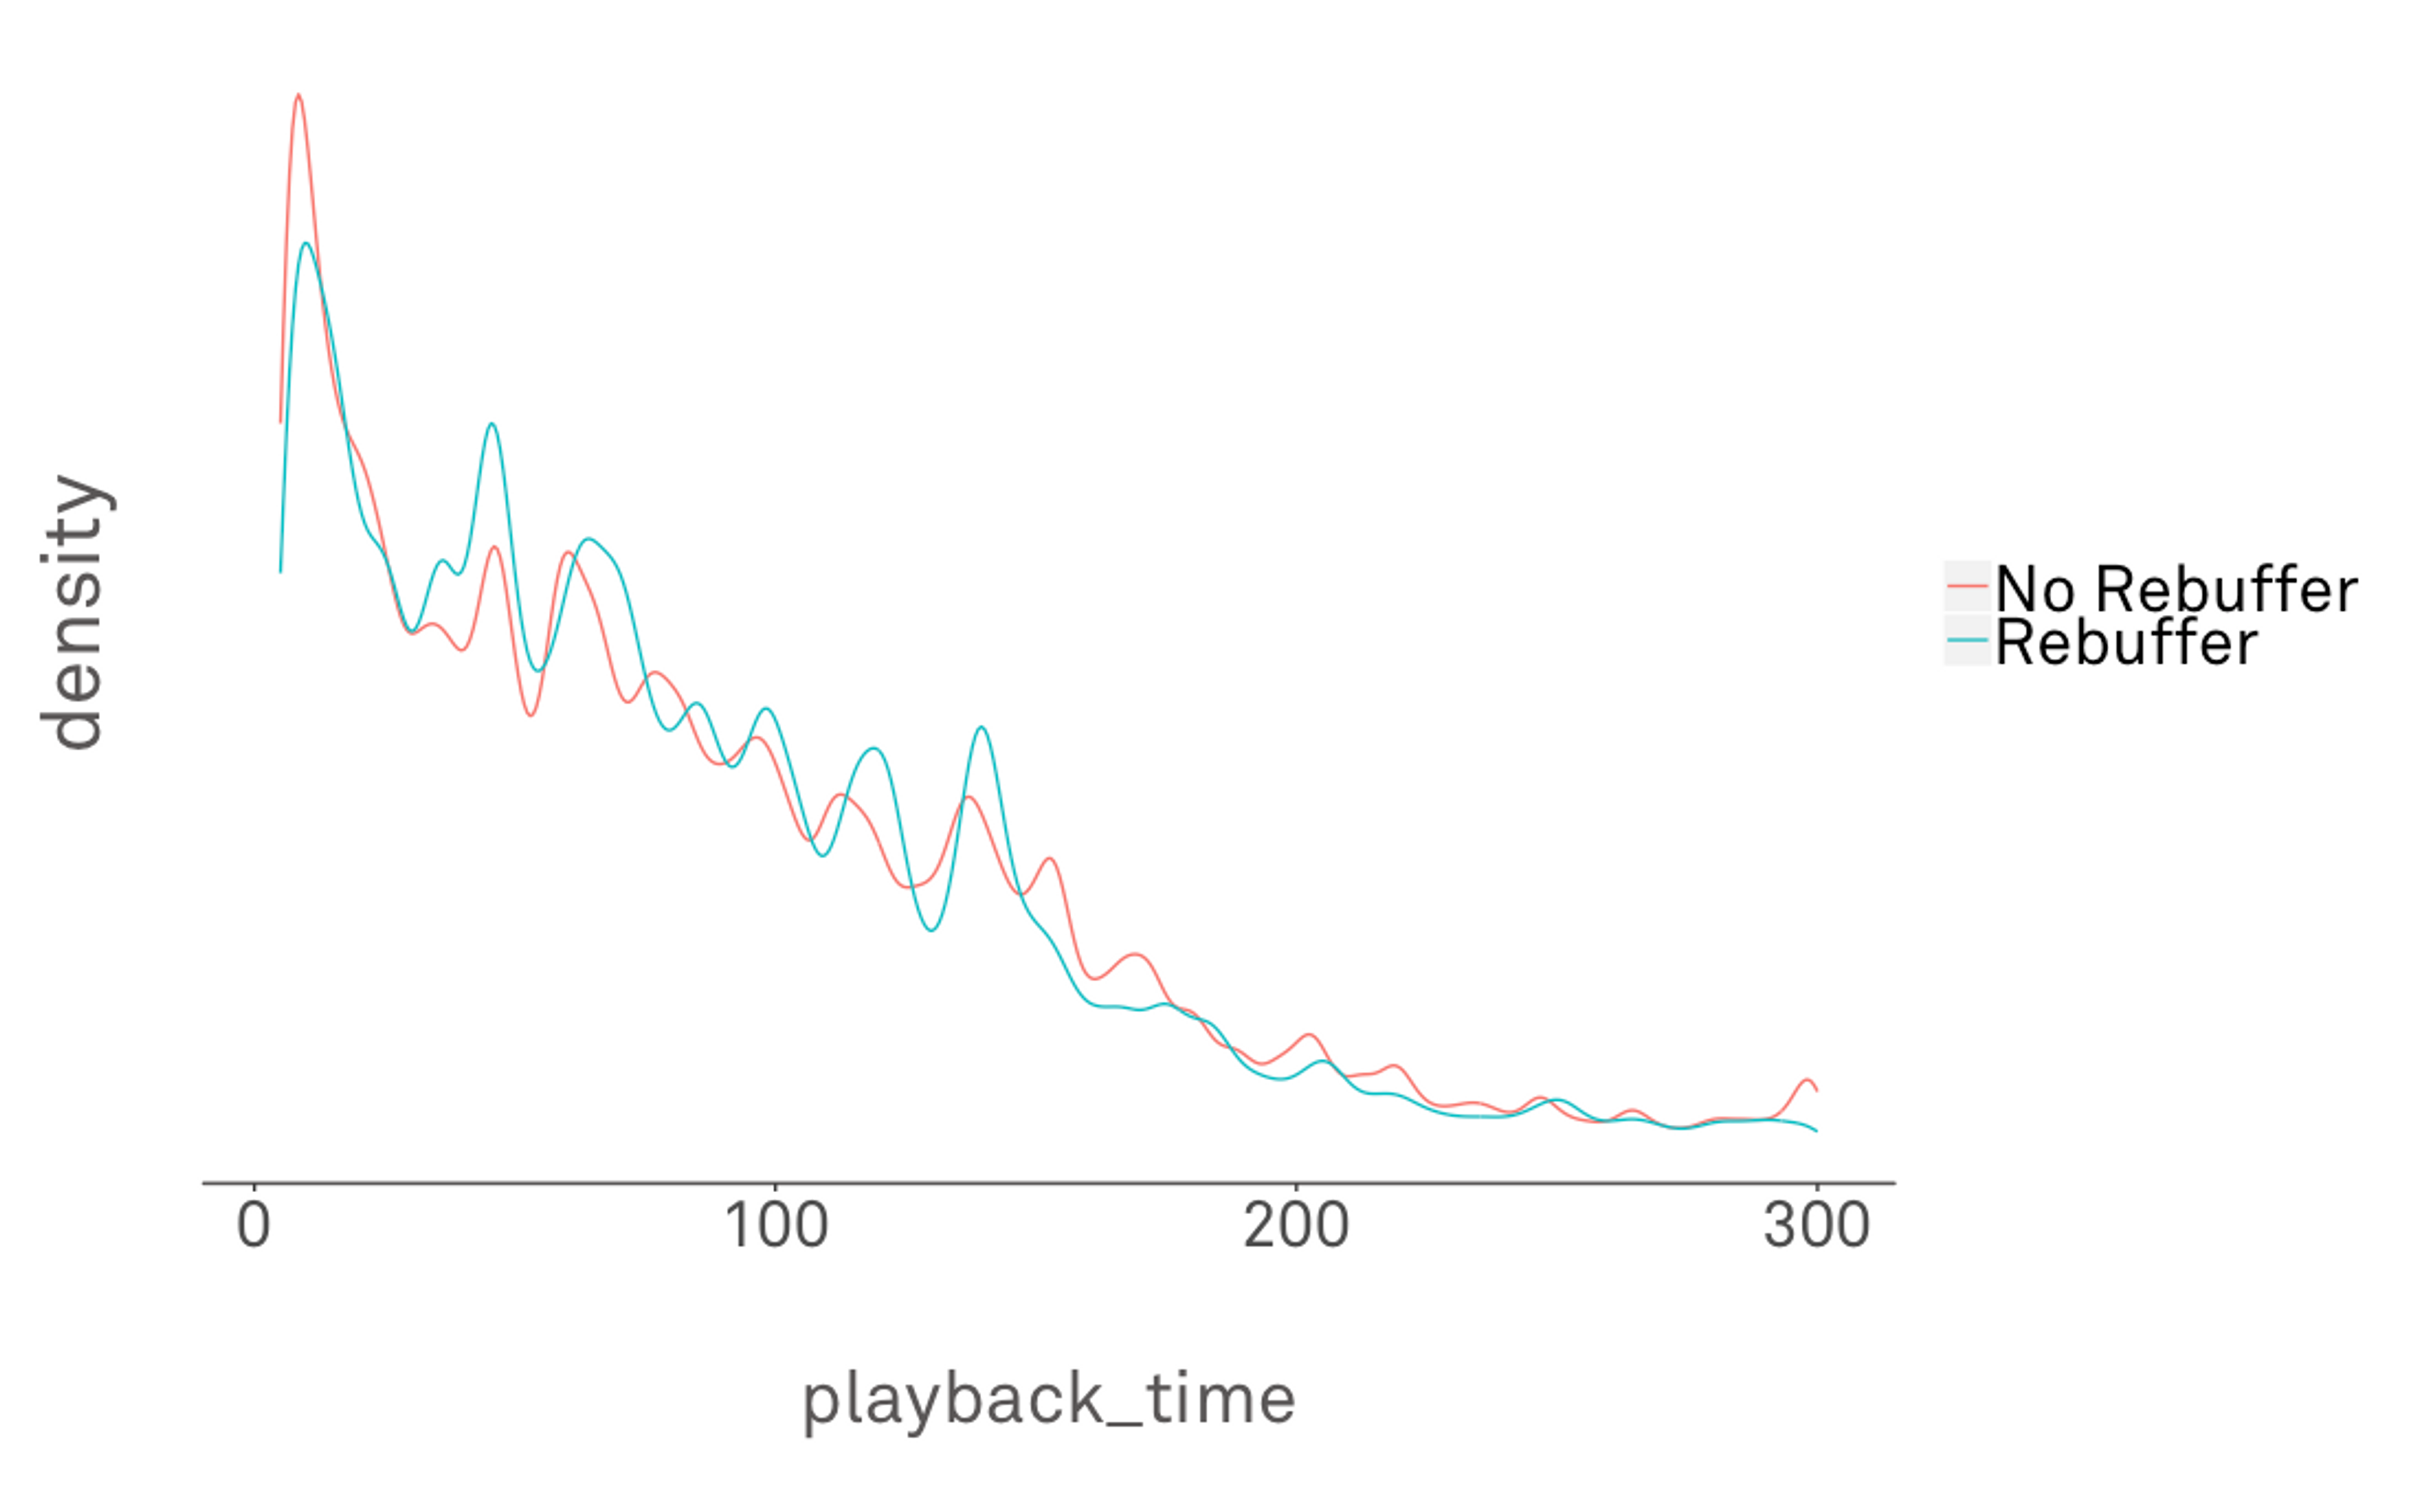 A graph showing playback time